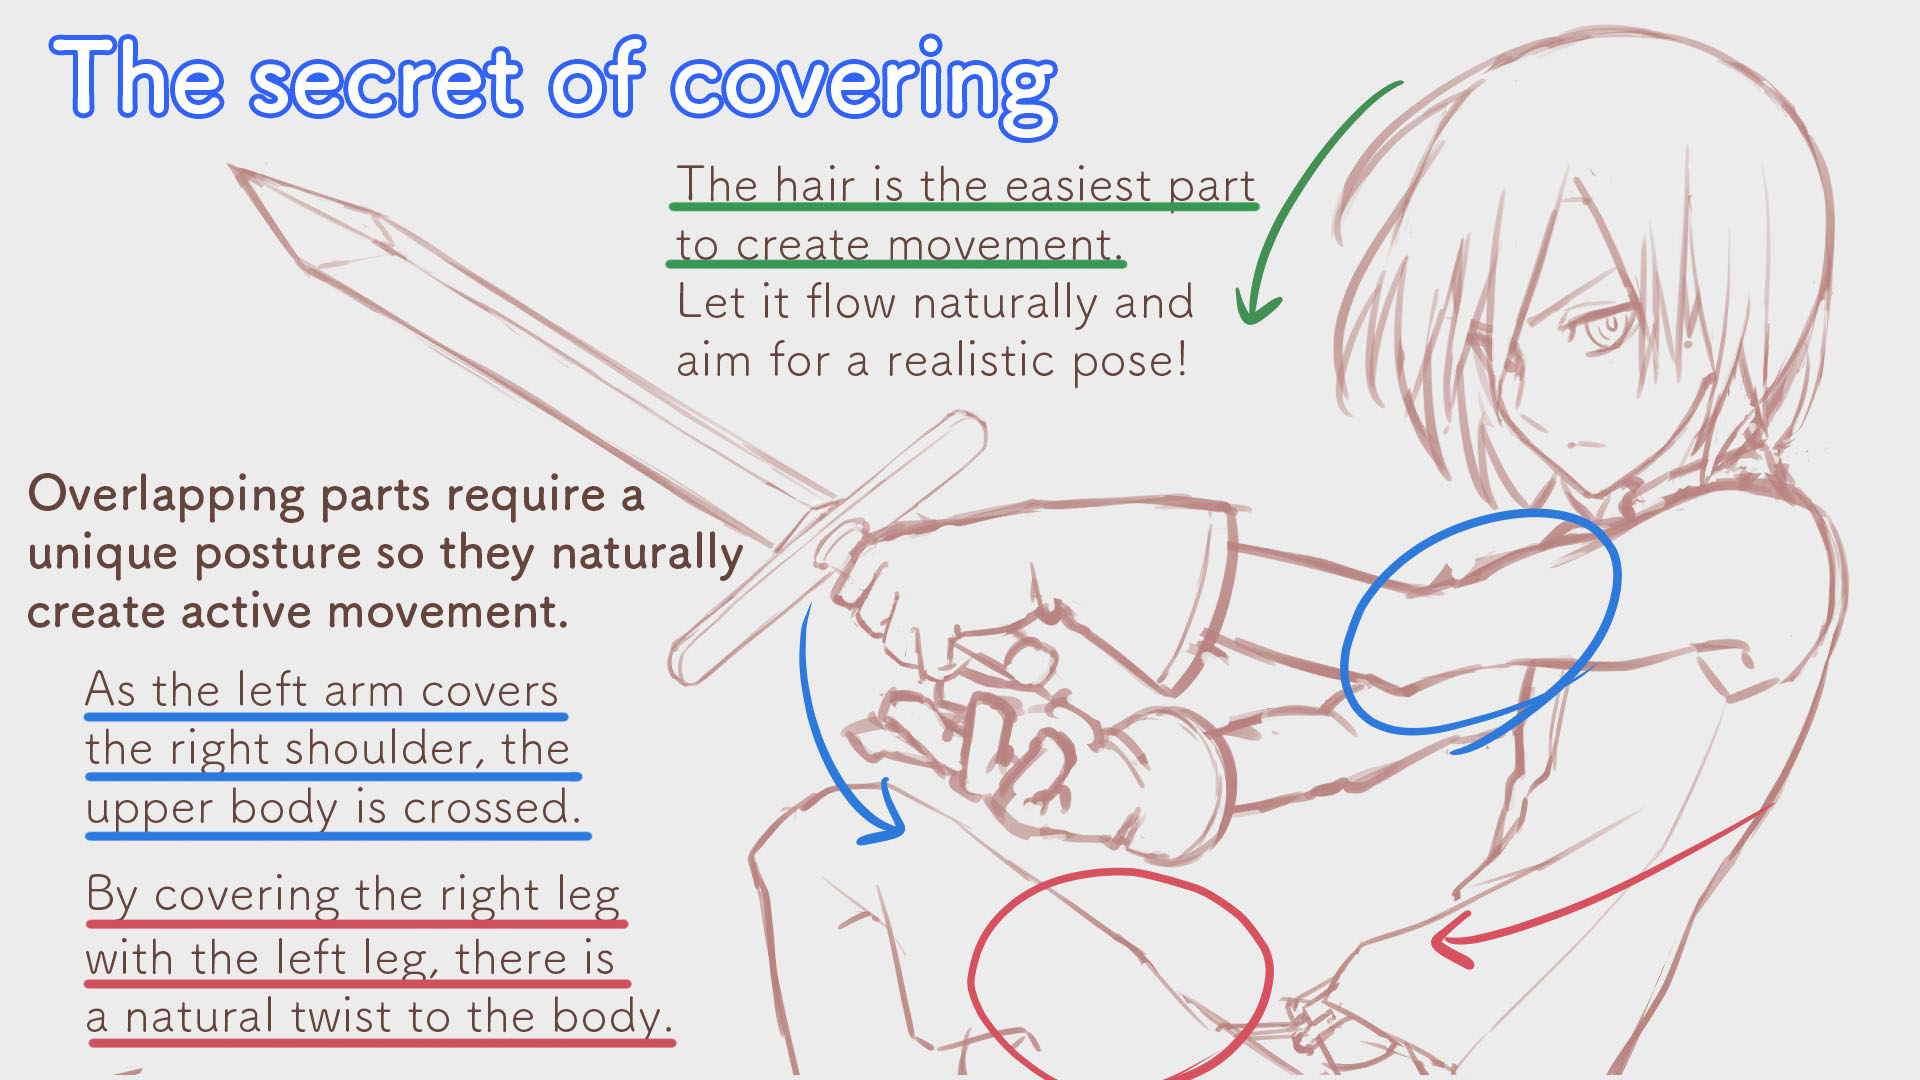 How to Draw ANIME POSES 2 (Anatomy) Tutorial - Step by Step (SWORD) -  YouTube